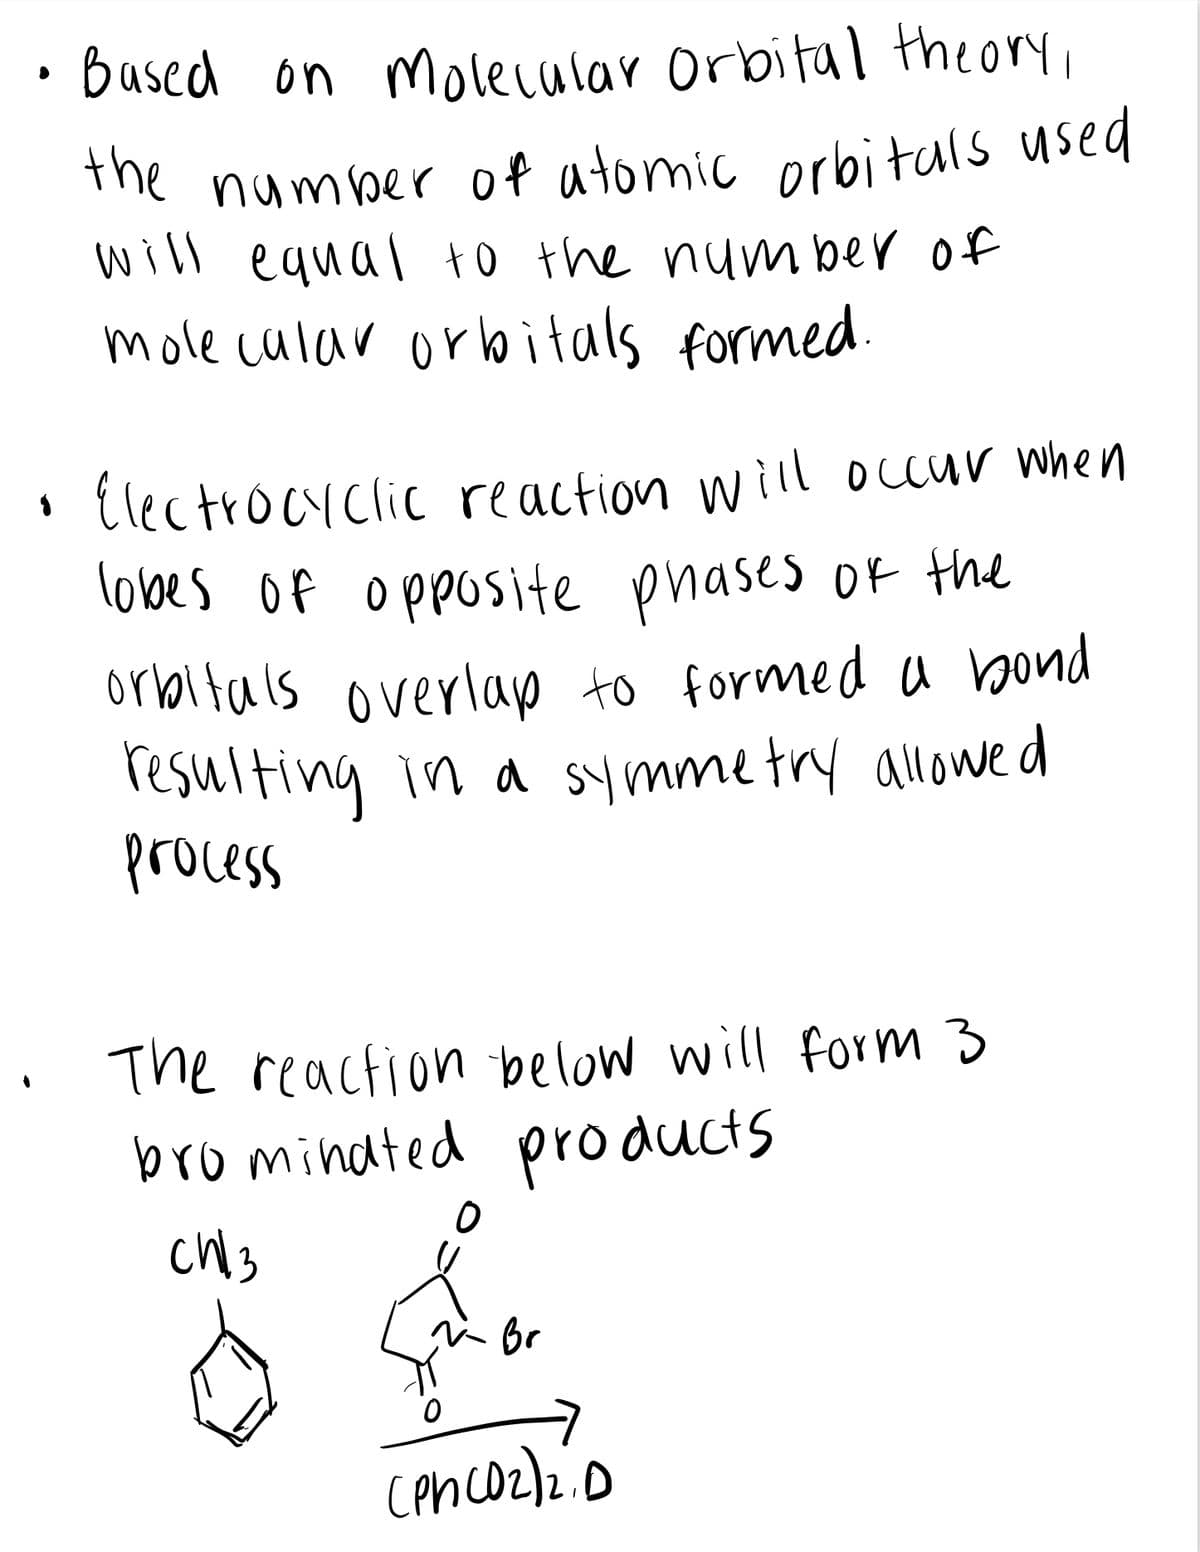 the number of atomic orbitals used
based on molecular Orbital theory,
the number of atomic prbitals used
will equal to the num ber of
mole calar orlbitals formed
1 Electrocyclic reaction will occur when
lobes Of opposite phases of the
orbltals overlap to formed a bond
resulting in a symmetry allowe d
process
The reaction below will form 3
bromindted products
Br
cencozlz.o
